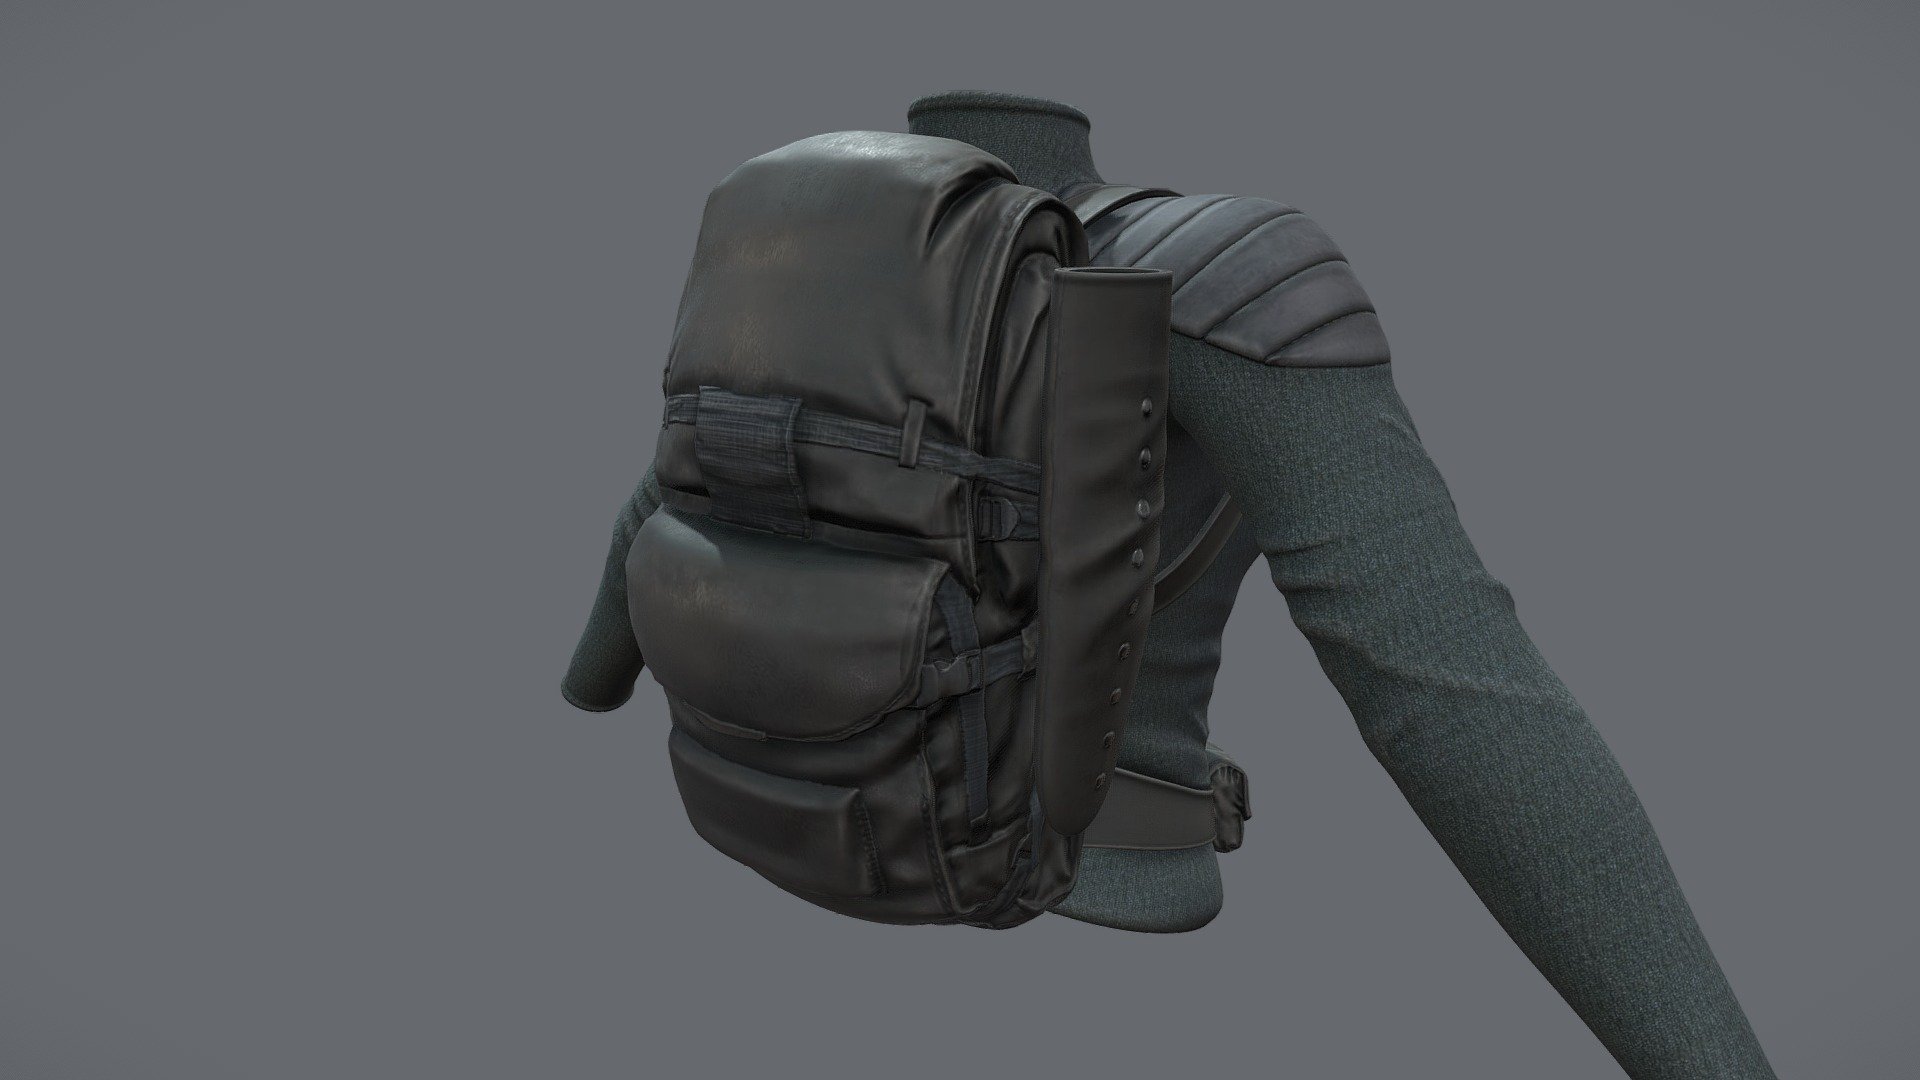 Female Tactical Combat Top With Backpack

Can be fitted to any character

Clean topology

No overlapping smart optimized unwrapped UVs

High-quality realistic textures

FBX, OBJ, gITF, USDZ (request other formats)

PBR or Classic

Type     user:3dia &ldquo;search term